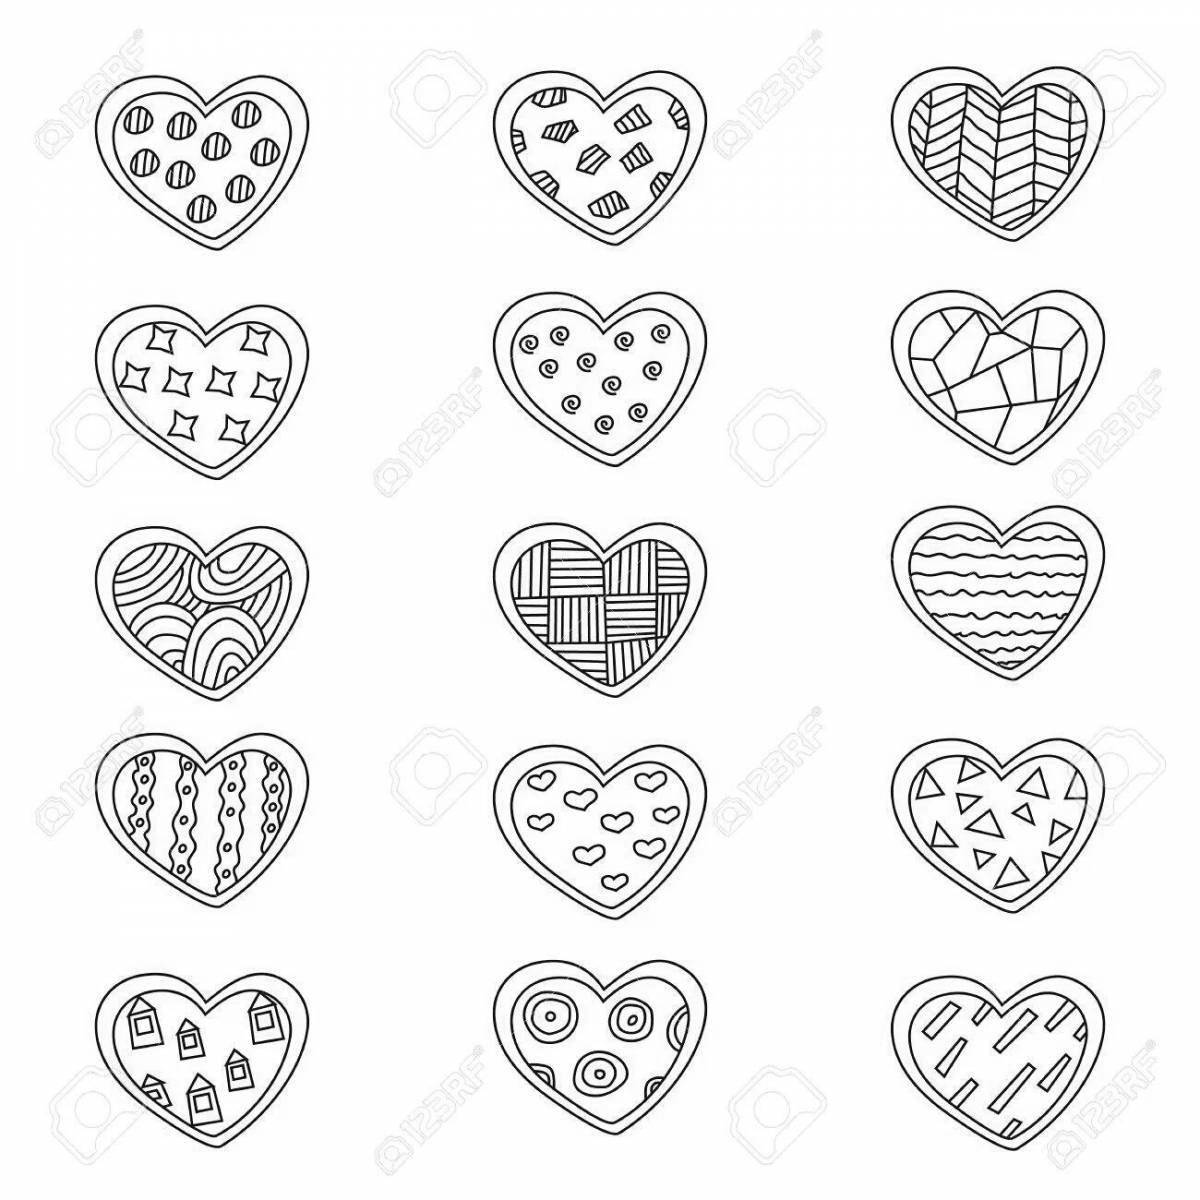 Delightful lot coloring page with hearts